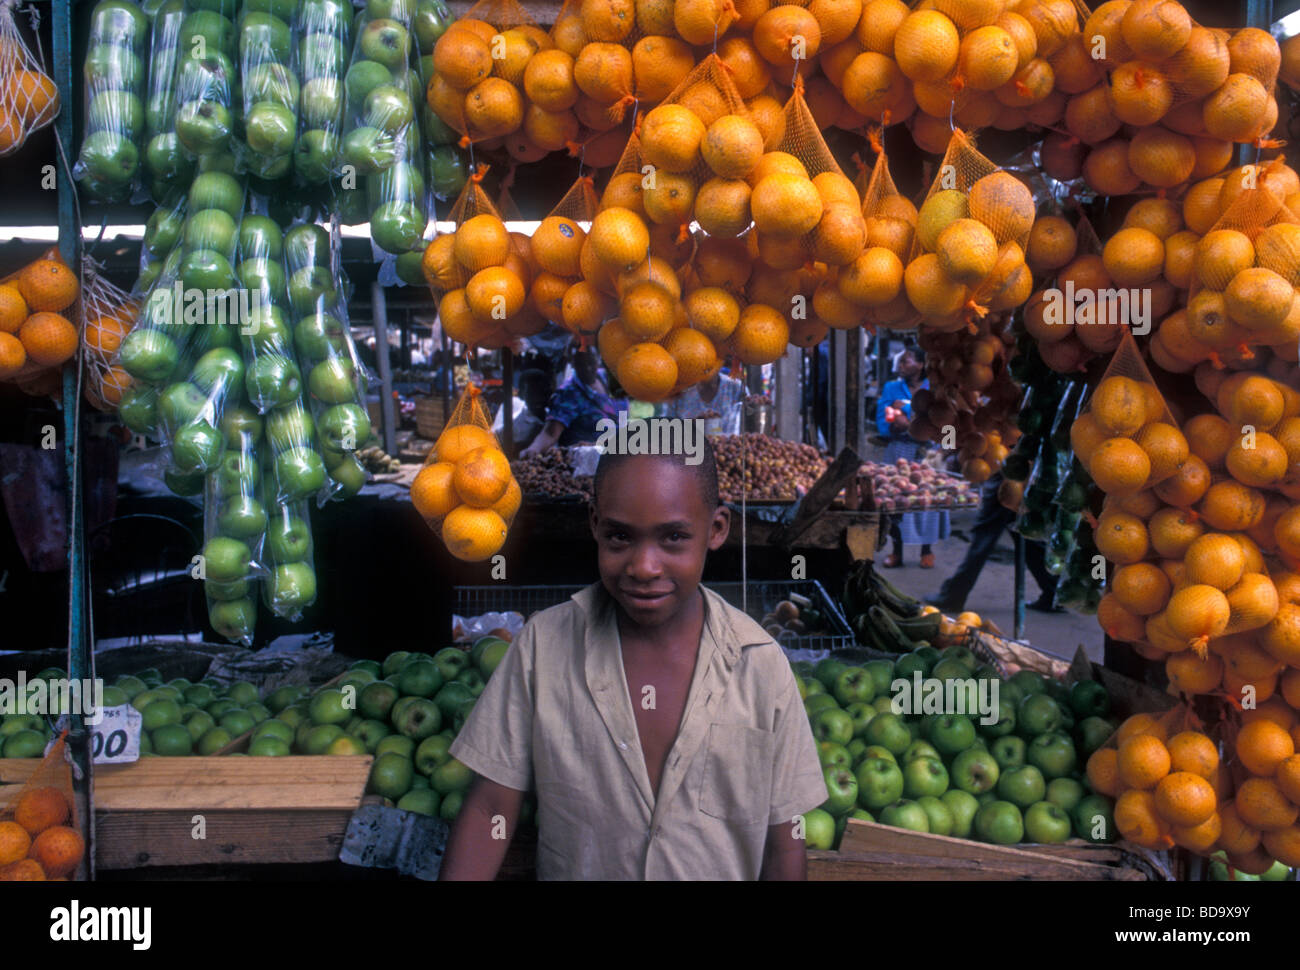 1, one, Zimbabwean boy, young boy, vendor, selling oranges, fruit and vegetable market, central market, city of Harare, Harare Province, Zimbabwe Stock Photo